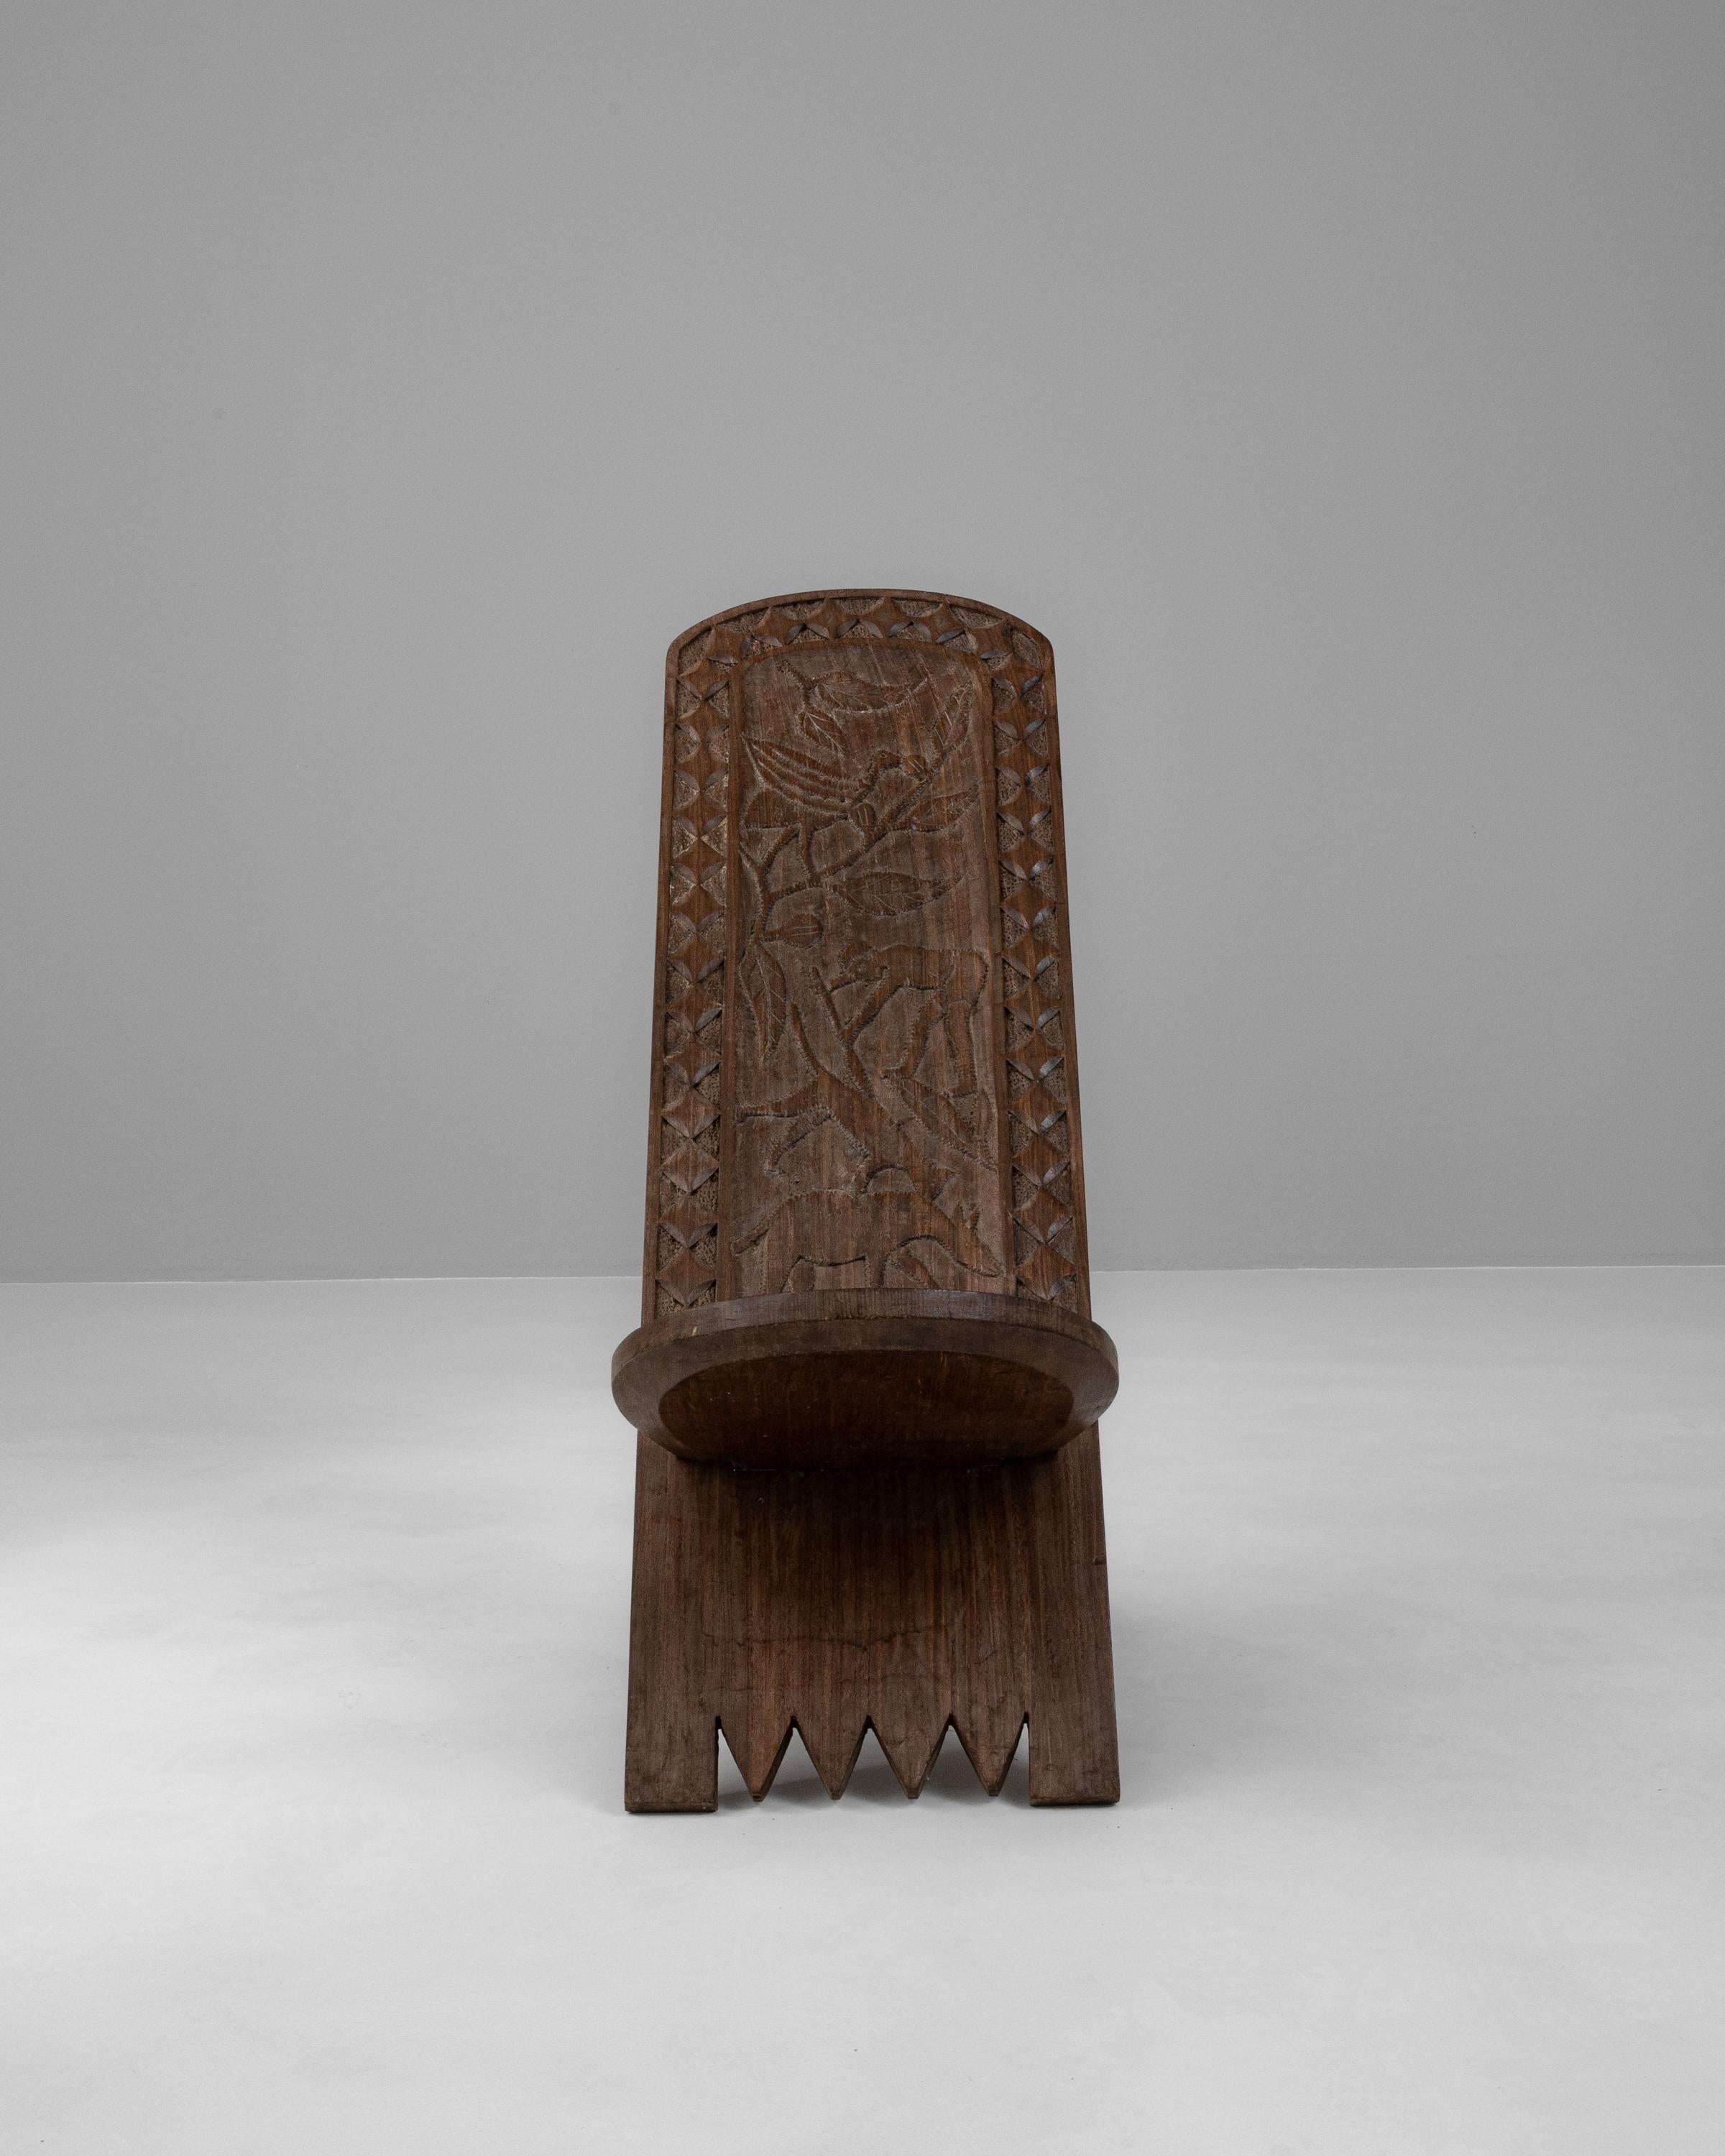 Unveil the essence of African artistry with this early 20th-century wooden chair, a piece that marries functionality with cultural expression. Crafted with the utmost care by skilled artisans, this chair's robust form is hewn from a dark, solid